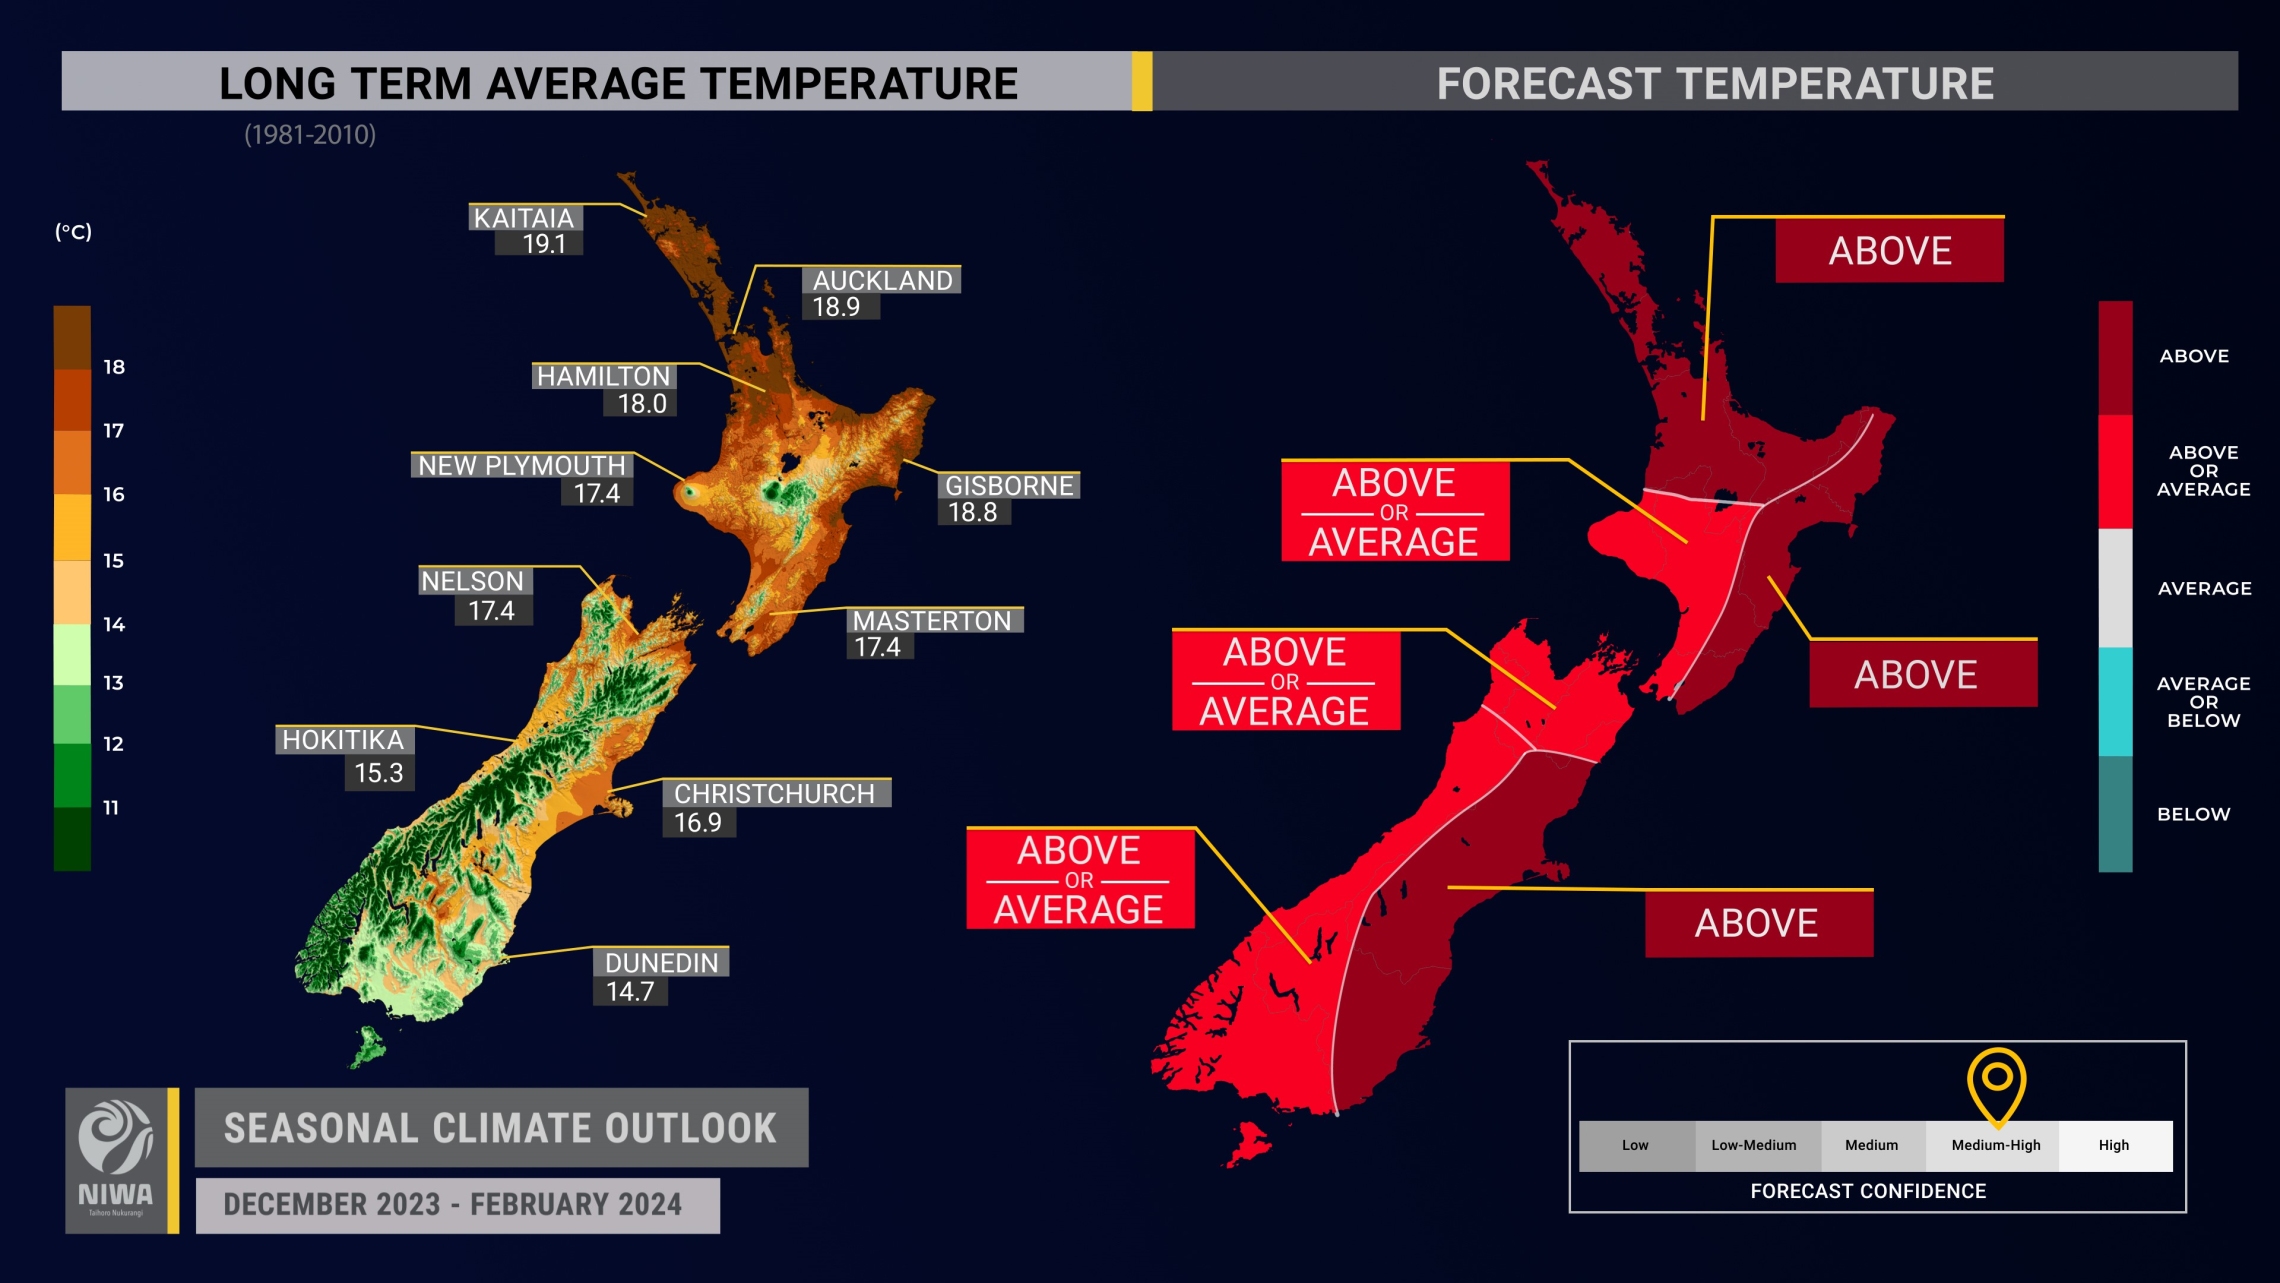 Side by side maps of long term average temperature and forecast temperatures in New Zealand. Long term average temperature map shows high temperatures in North Island ranging from 17-19C. 
Forecast temperature map shows above or average temperature for all of New Zealand.